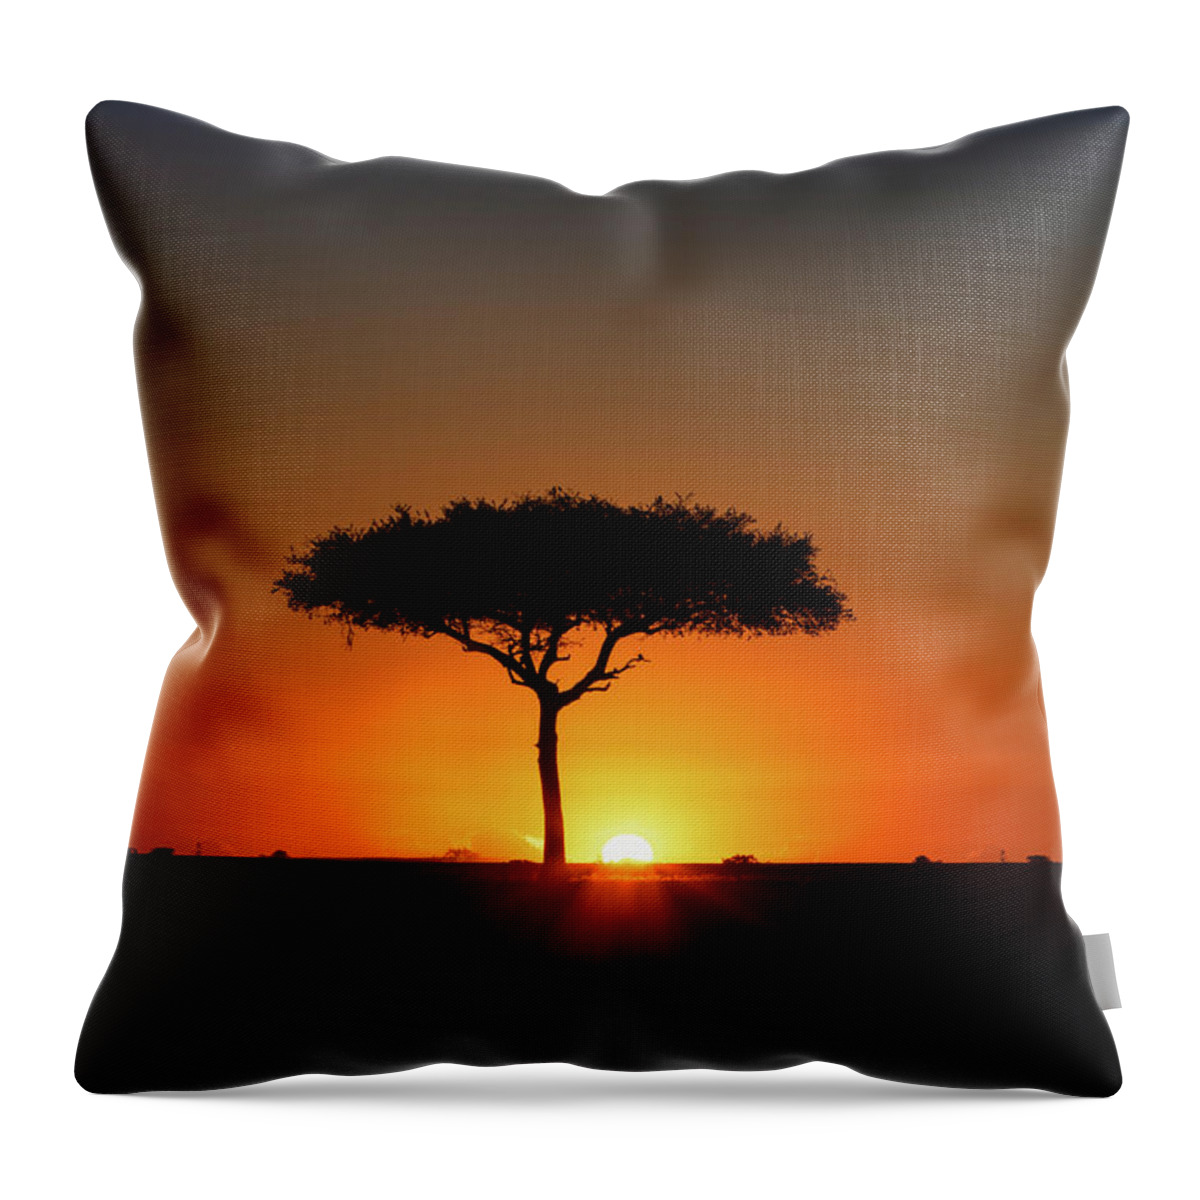 Sunset Throw Pillow featuring the photograph Single Acacia Tree on Horizon at Colorful Sunset by Good Focused